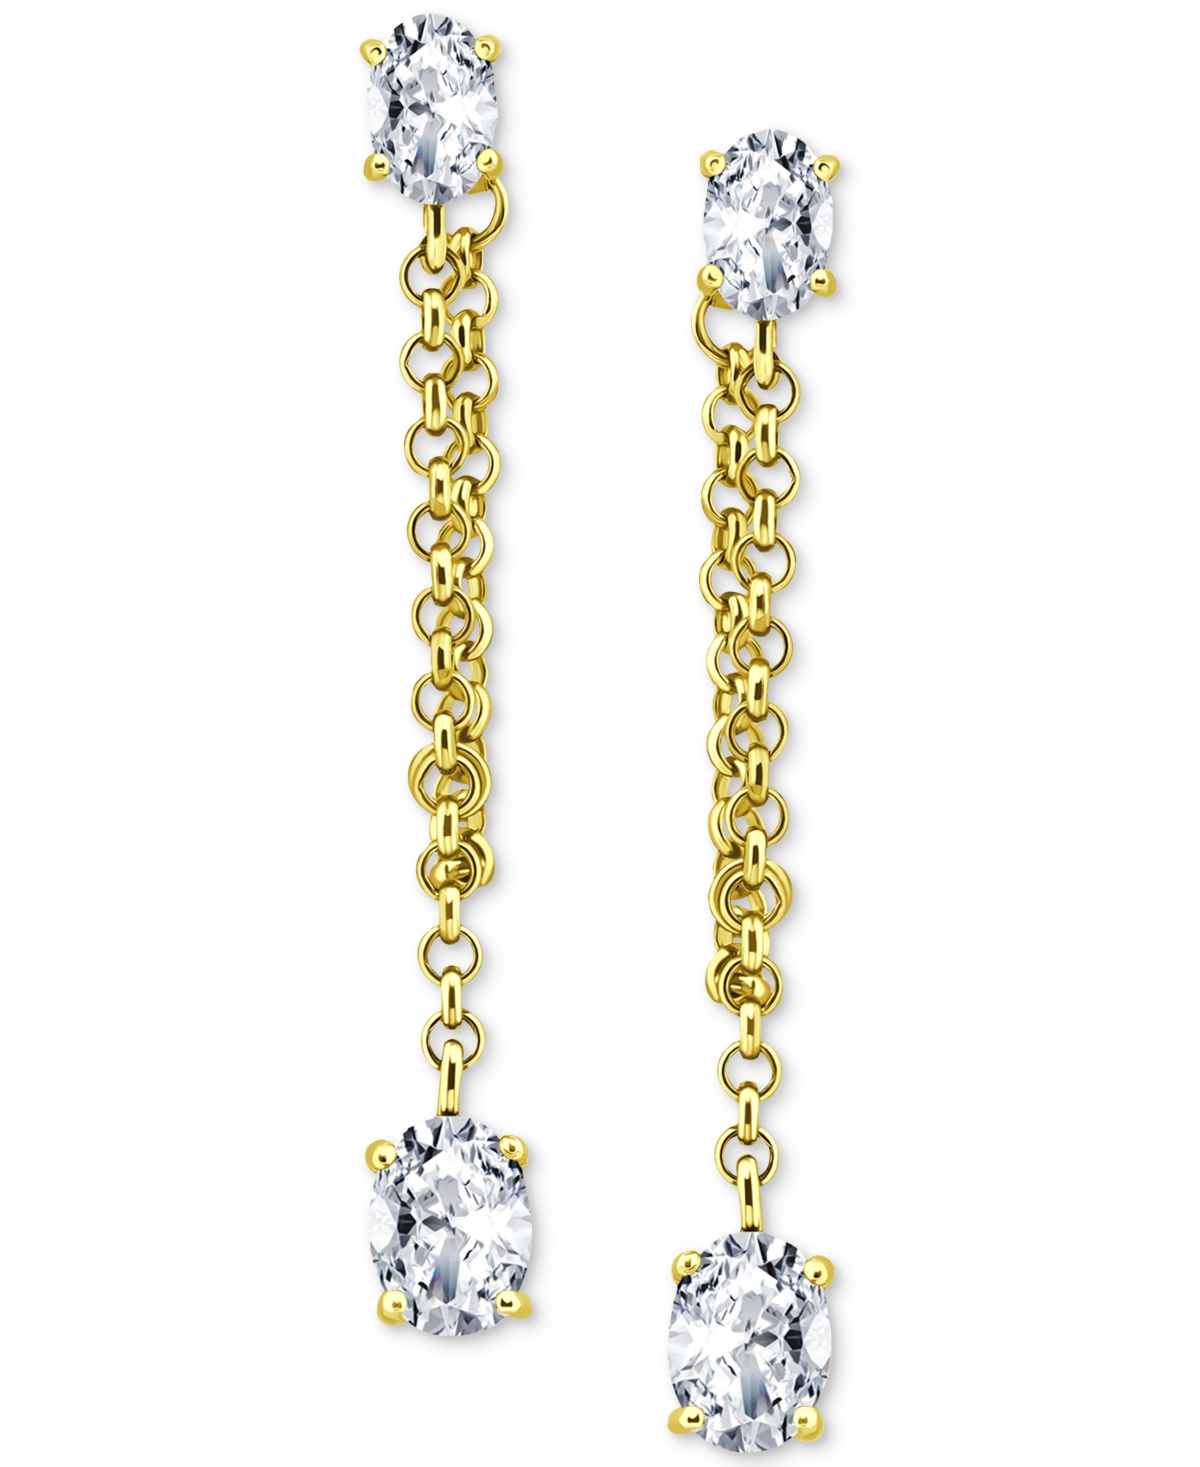 Giani Bernini Cubic Zirconia Front To Back Chain Drop Earrings In 18k Gold-plated Sterling Silver, Created For Mac